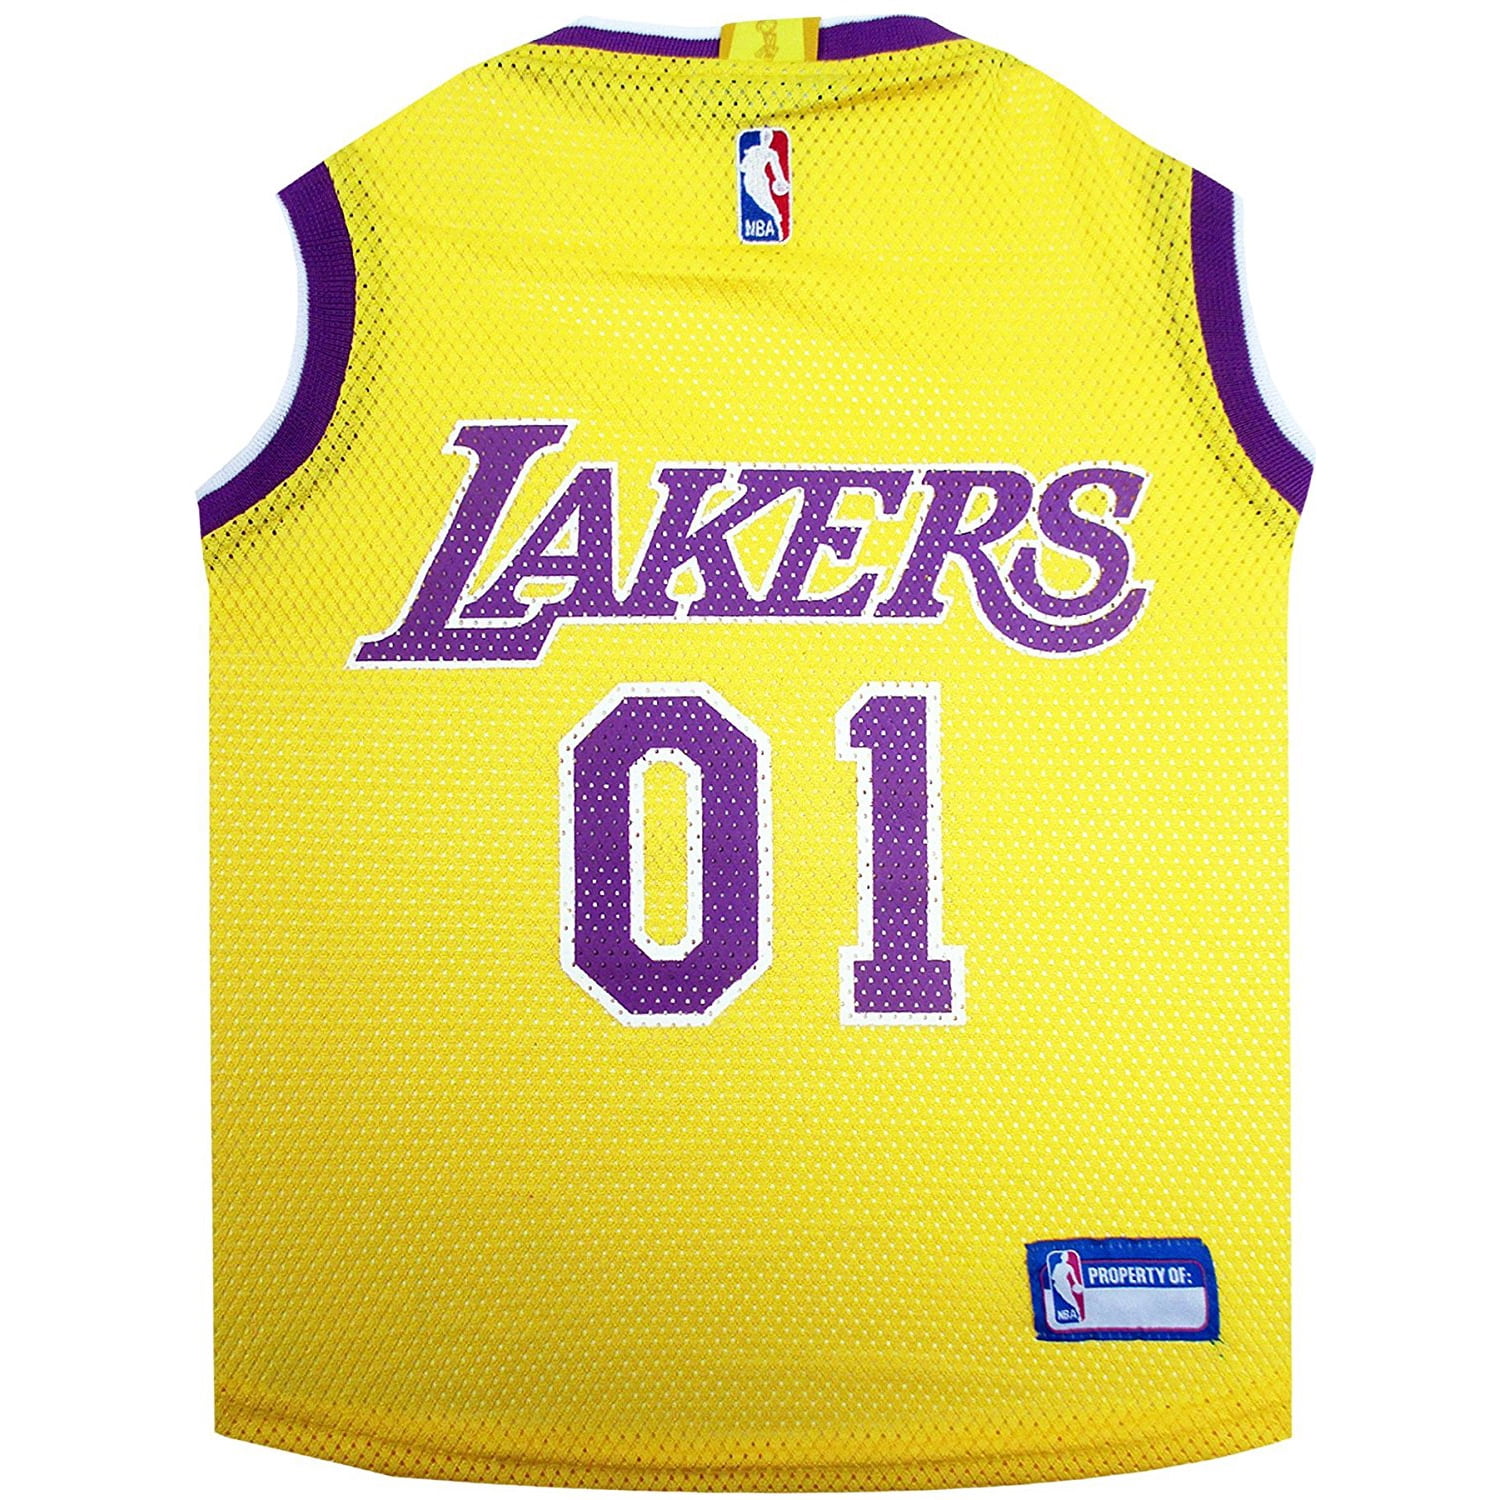 Los Angeles Lakers Jersey History - Jersey Museum